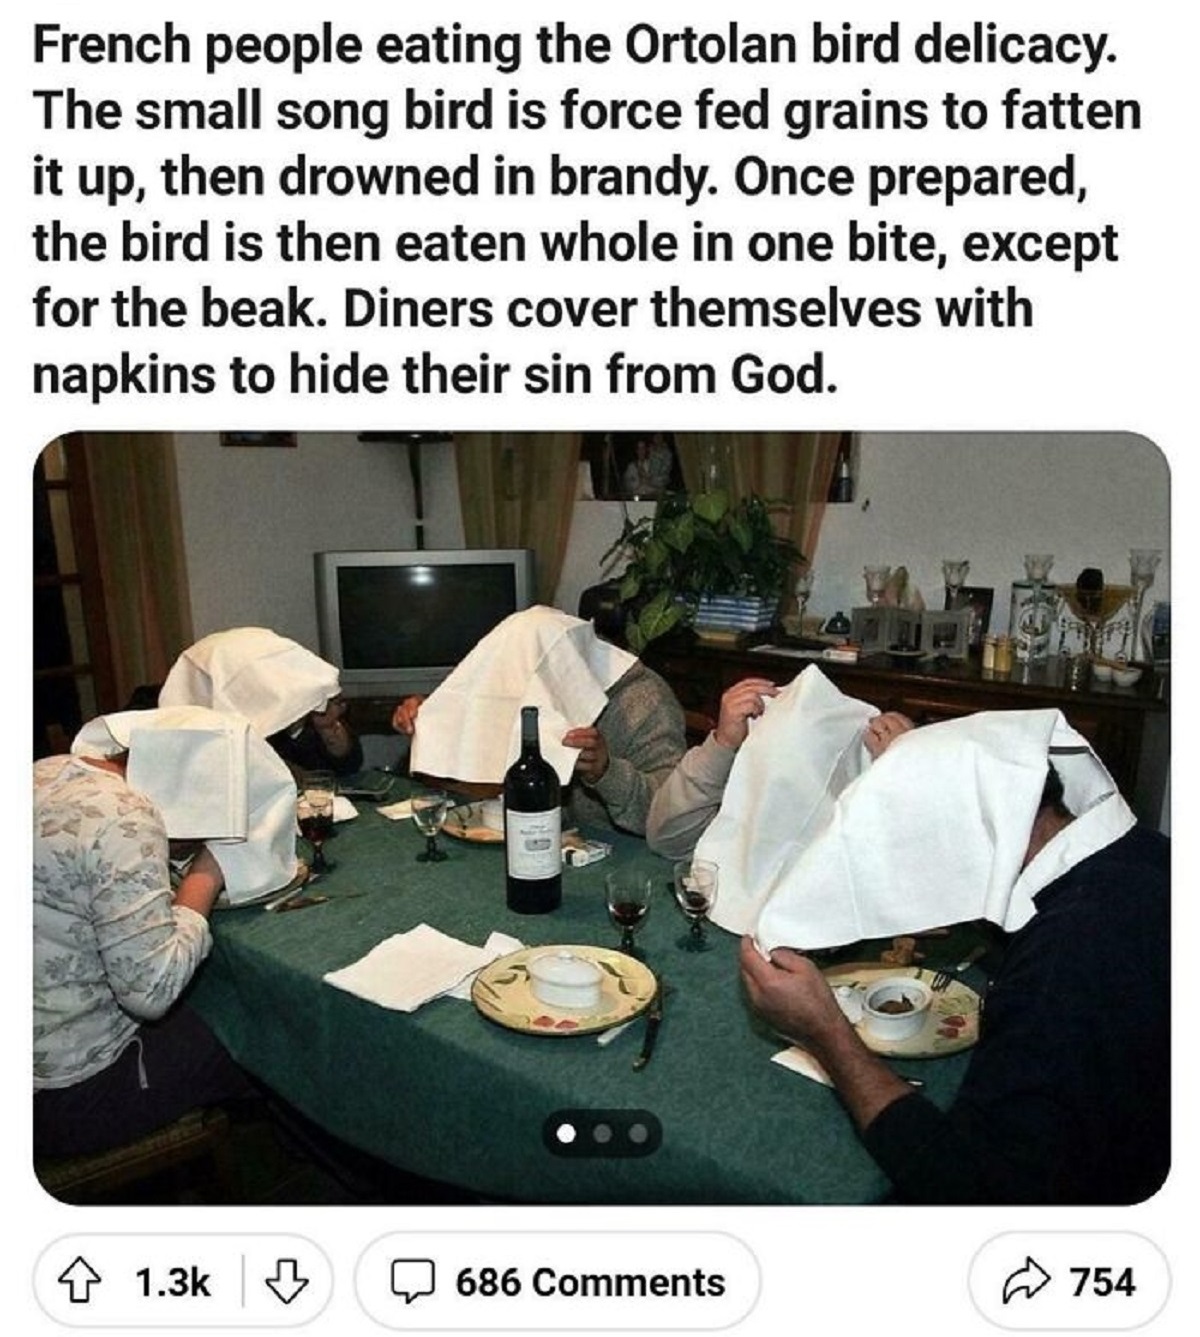 drowned bird in brandy - French people eating the Ortolan bird delicacy. The small song bird is force fed grains to fatten it up, then drowned in brandy. Once prepared, the bird is then eaten whole in one bite, except for the beak. Diners cover themselves